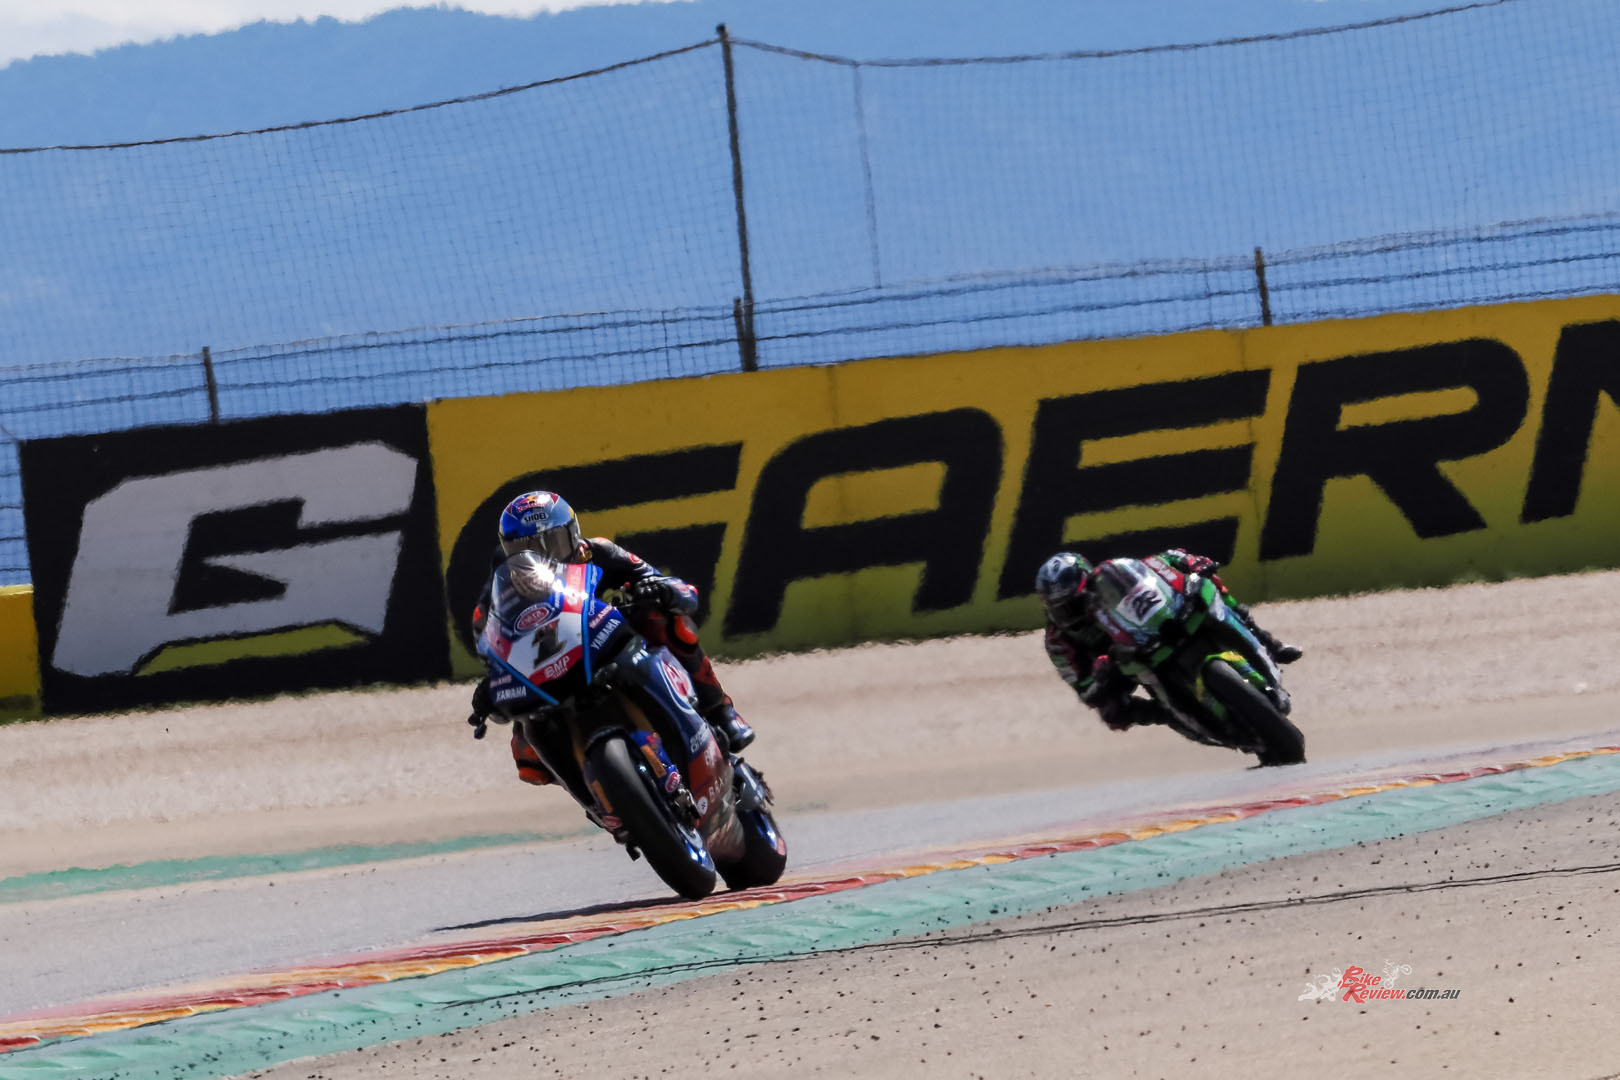 From the box seat start, Bautista fought off early challenges but streaked ahead to take victory by more than four seconds from Kawasaki’s Jonathan Rea with Toprak Razgatlioglu in third.